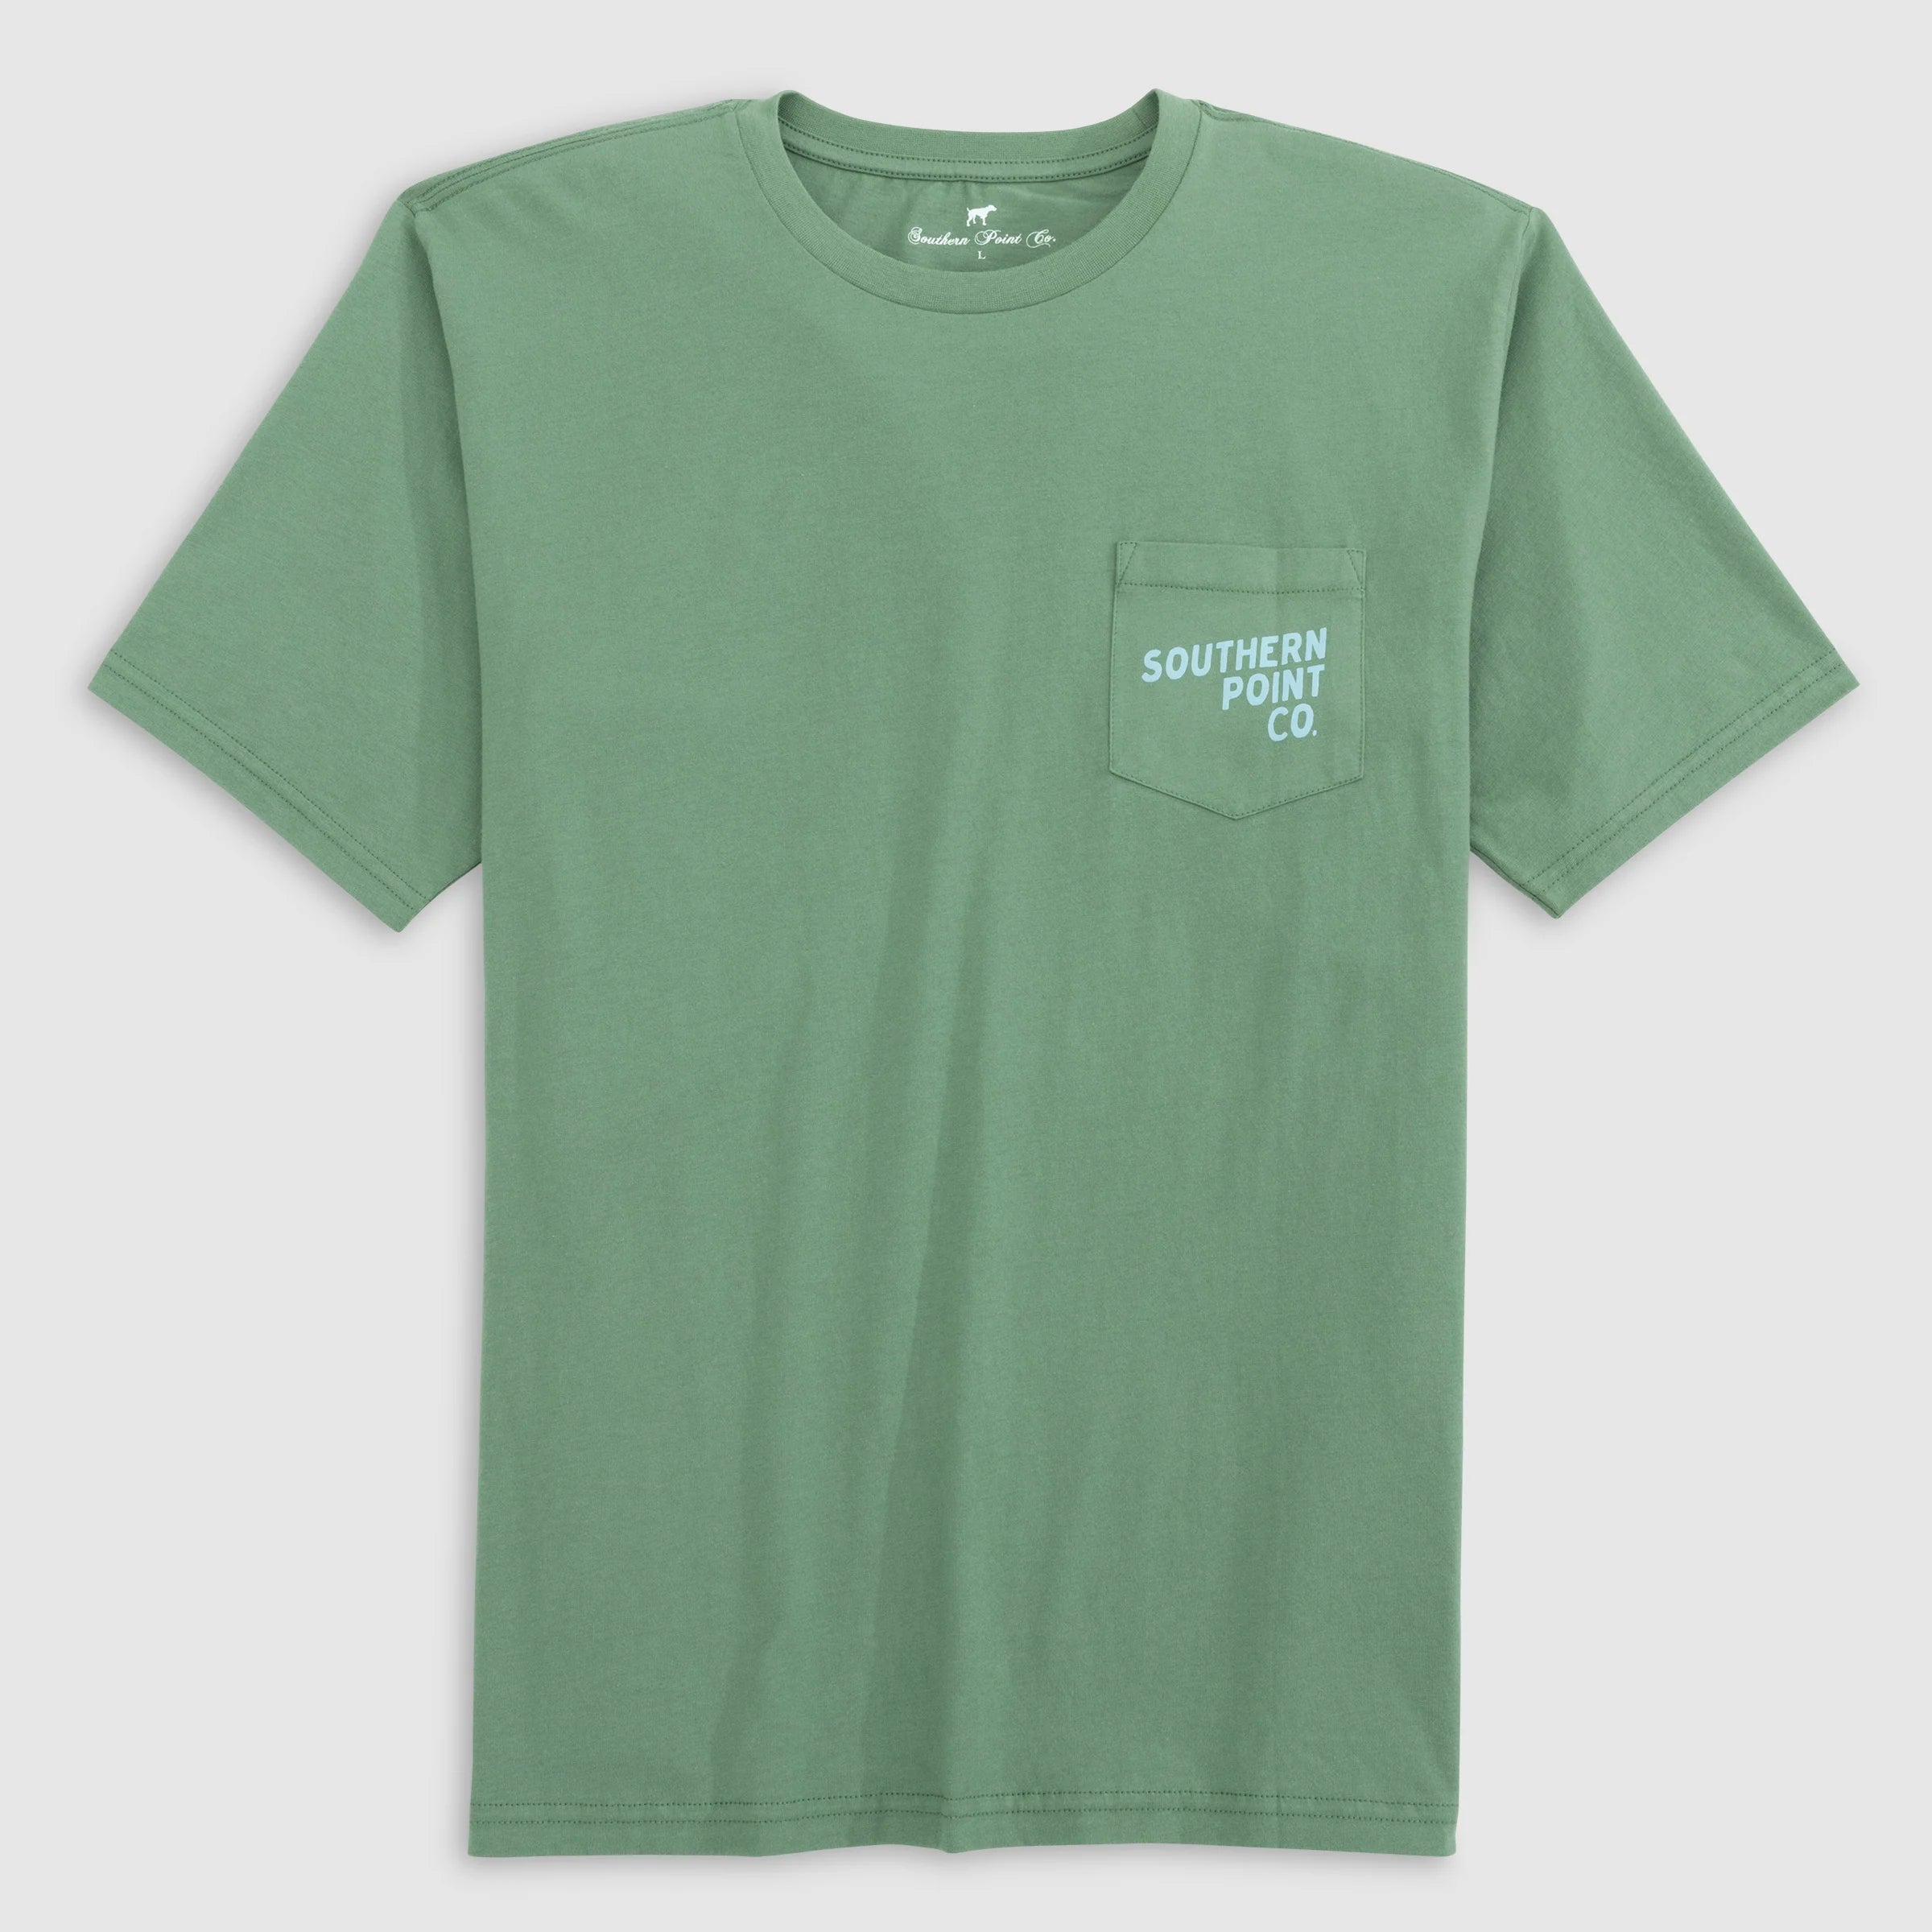 Beach Cruiser Tee by Southern Point Co.